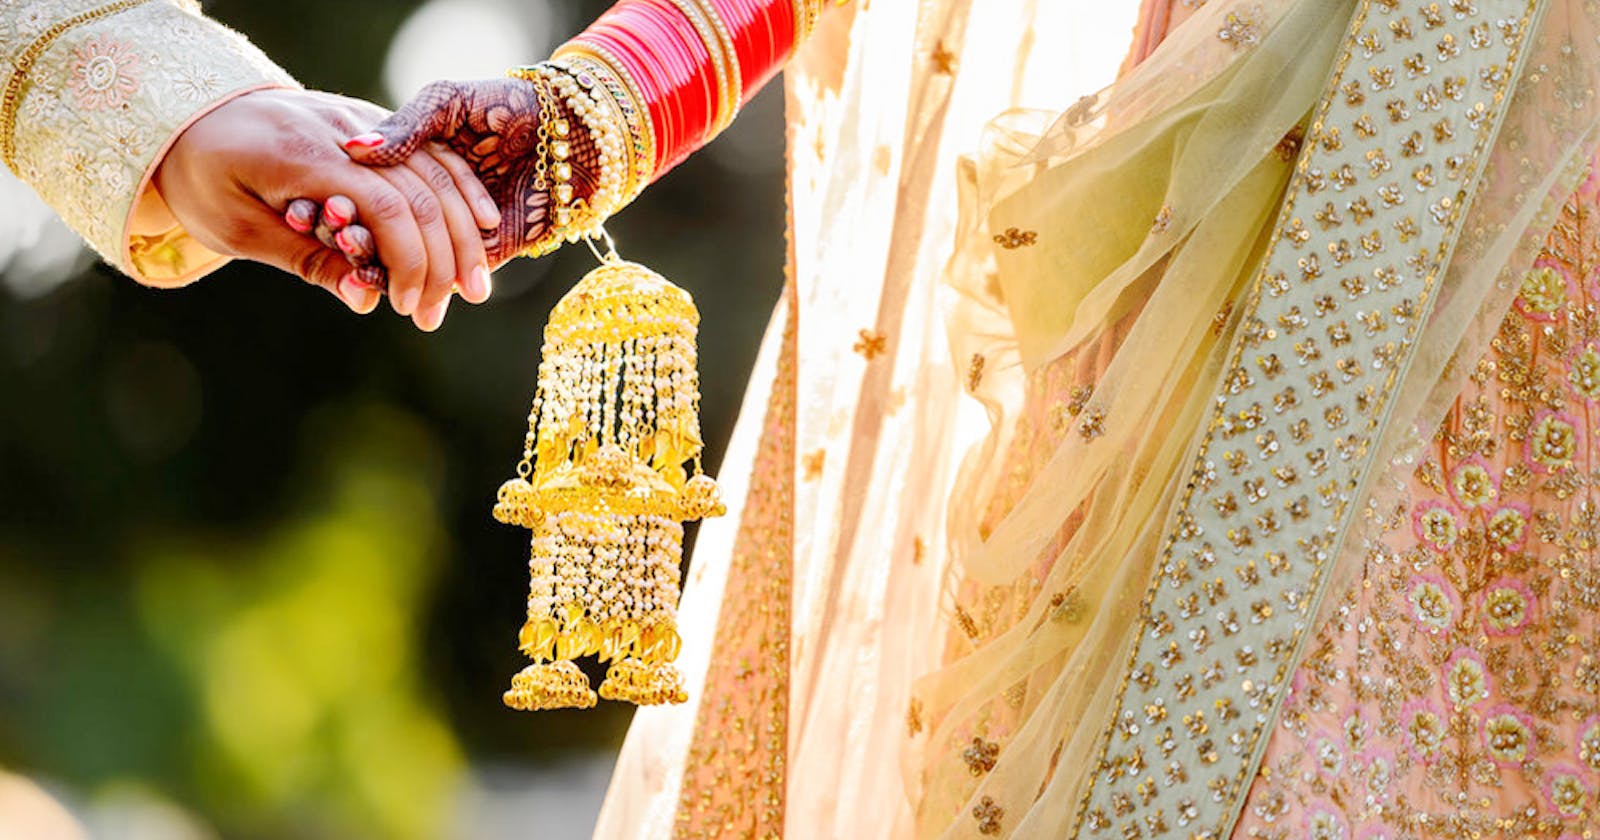 Some good matrimonial websites for Indian People in the UK